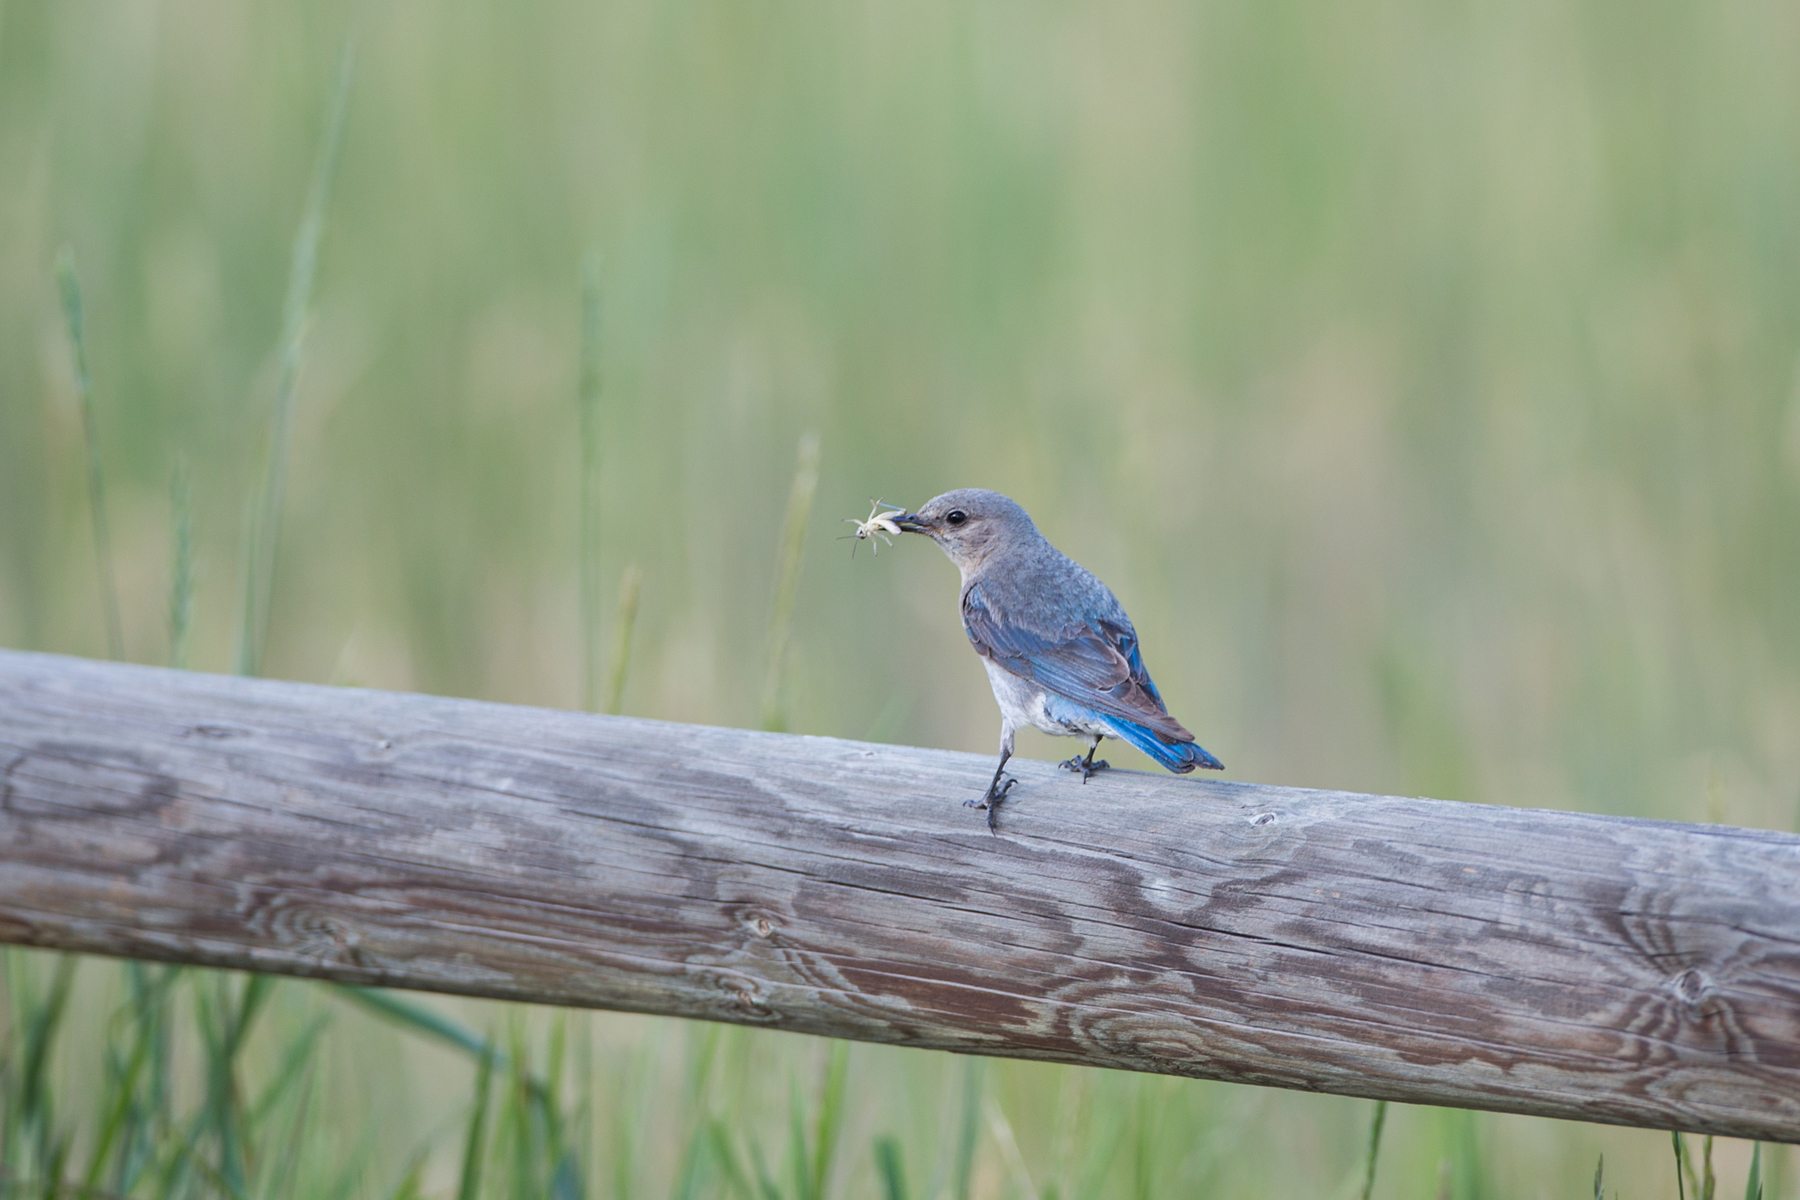 Mountain Bluebird fledgling with grasshopper, Red Lodge, MT, 2021.  Click for next photo.